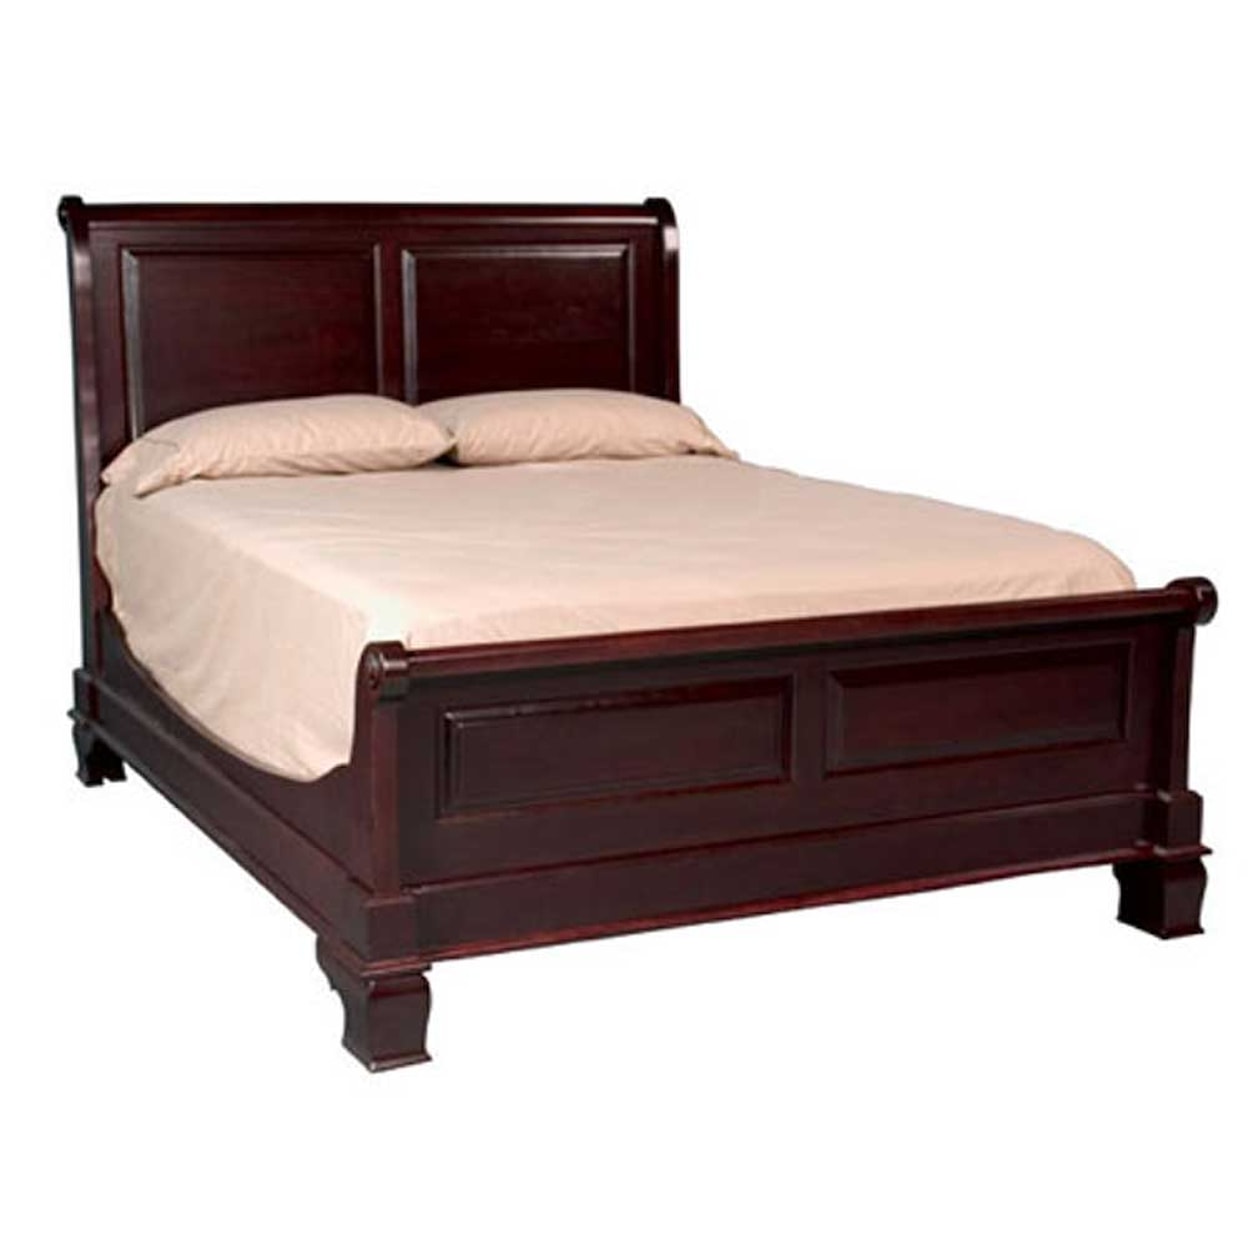 Simply Amish Imperial Amish King Sleigh Bed